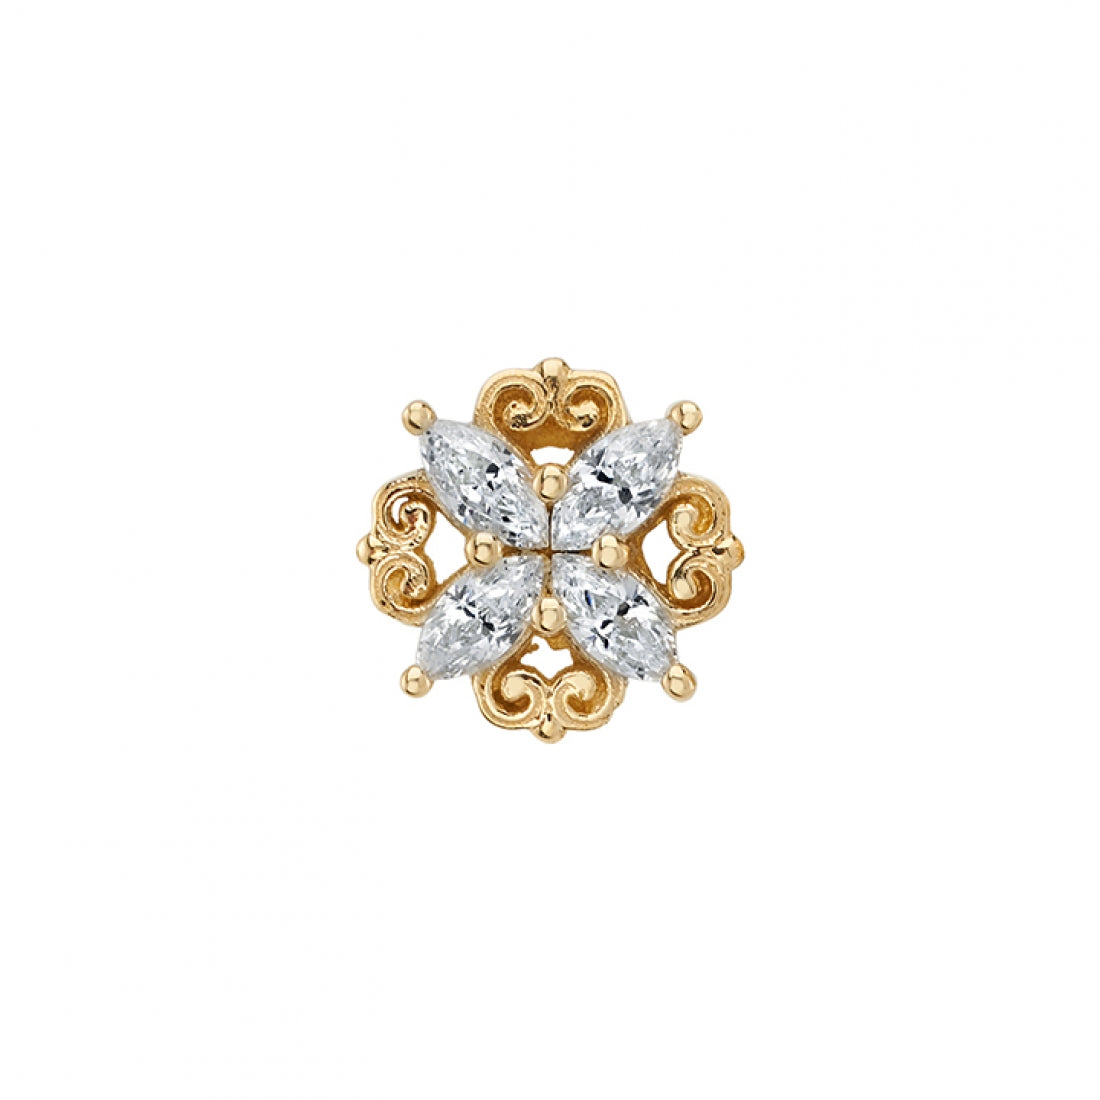 BVLA - LAMIA MARQUISE CLUSTER - 14KT SOLID GOLD - THREADED END